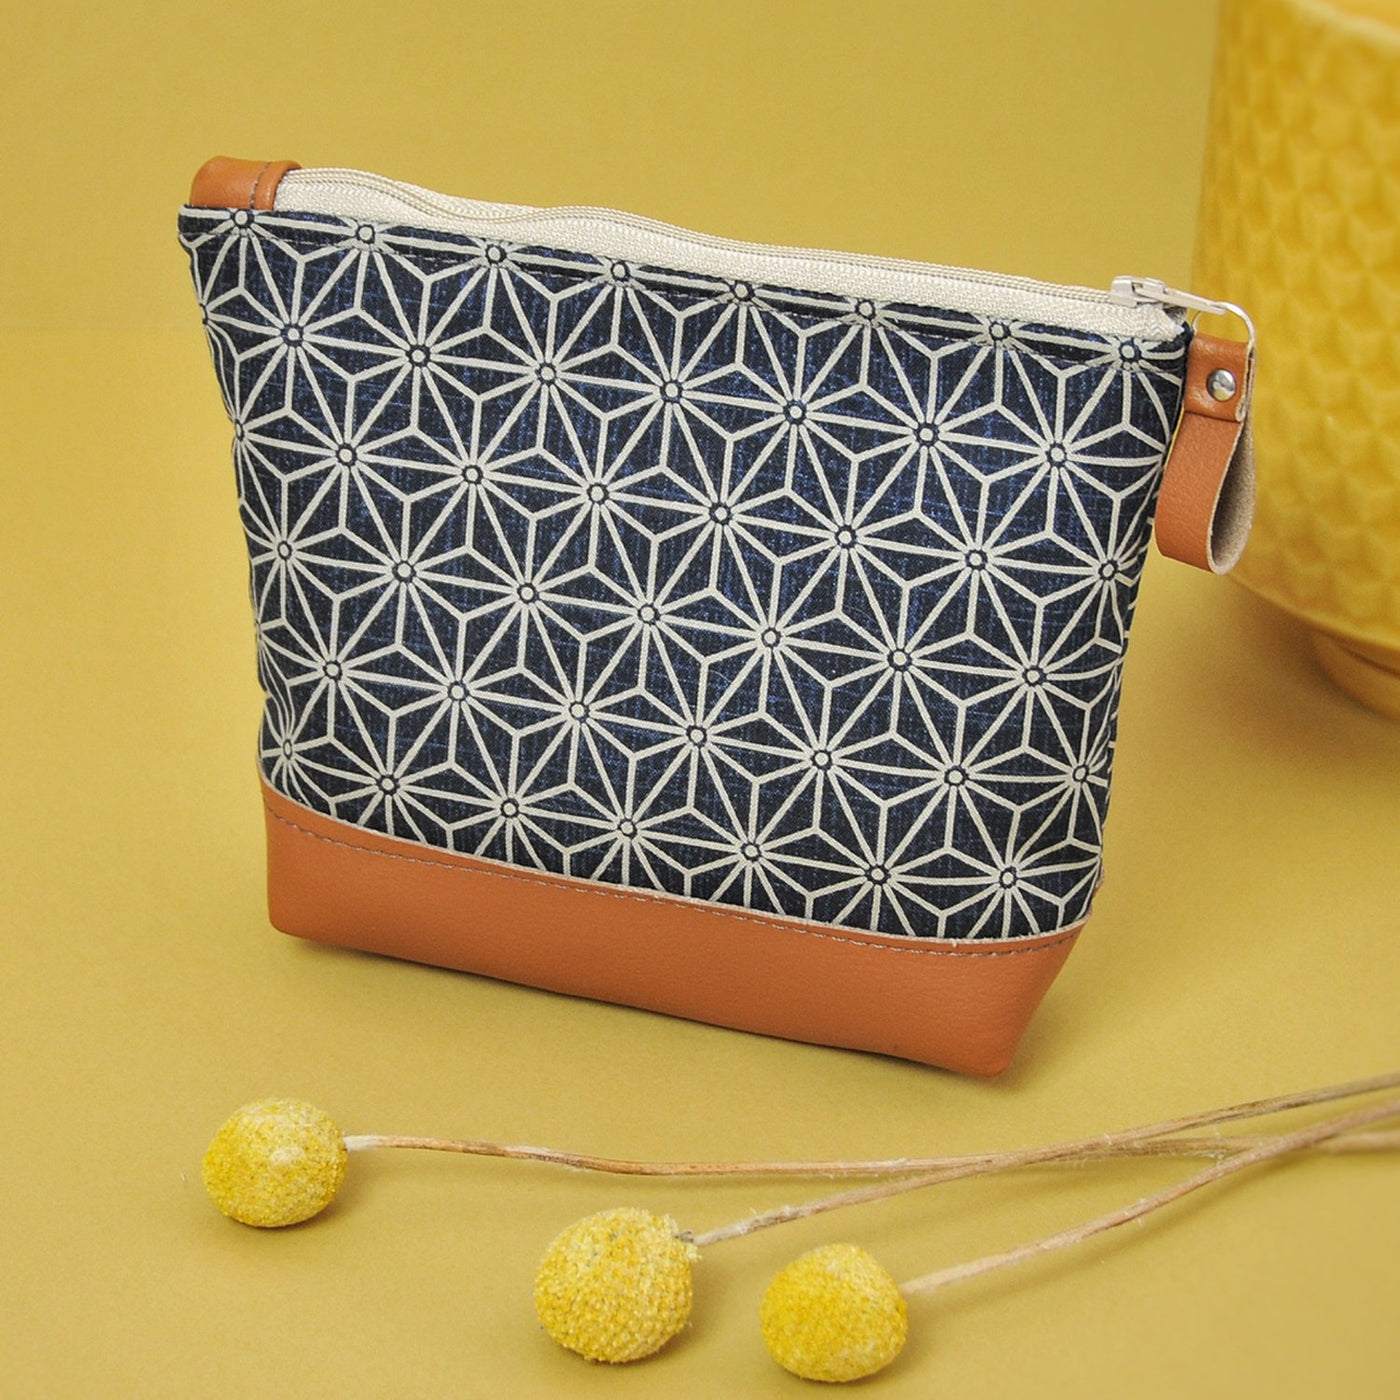 Recycled leather make up bag on yellow background